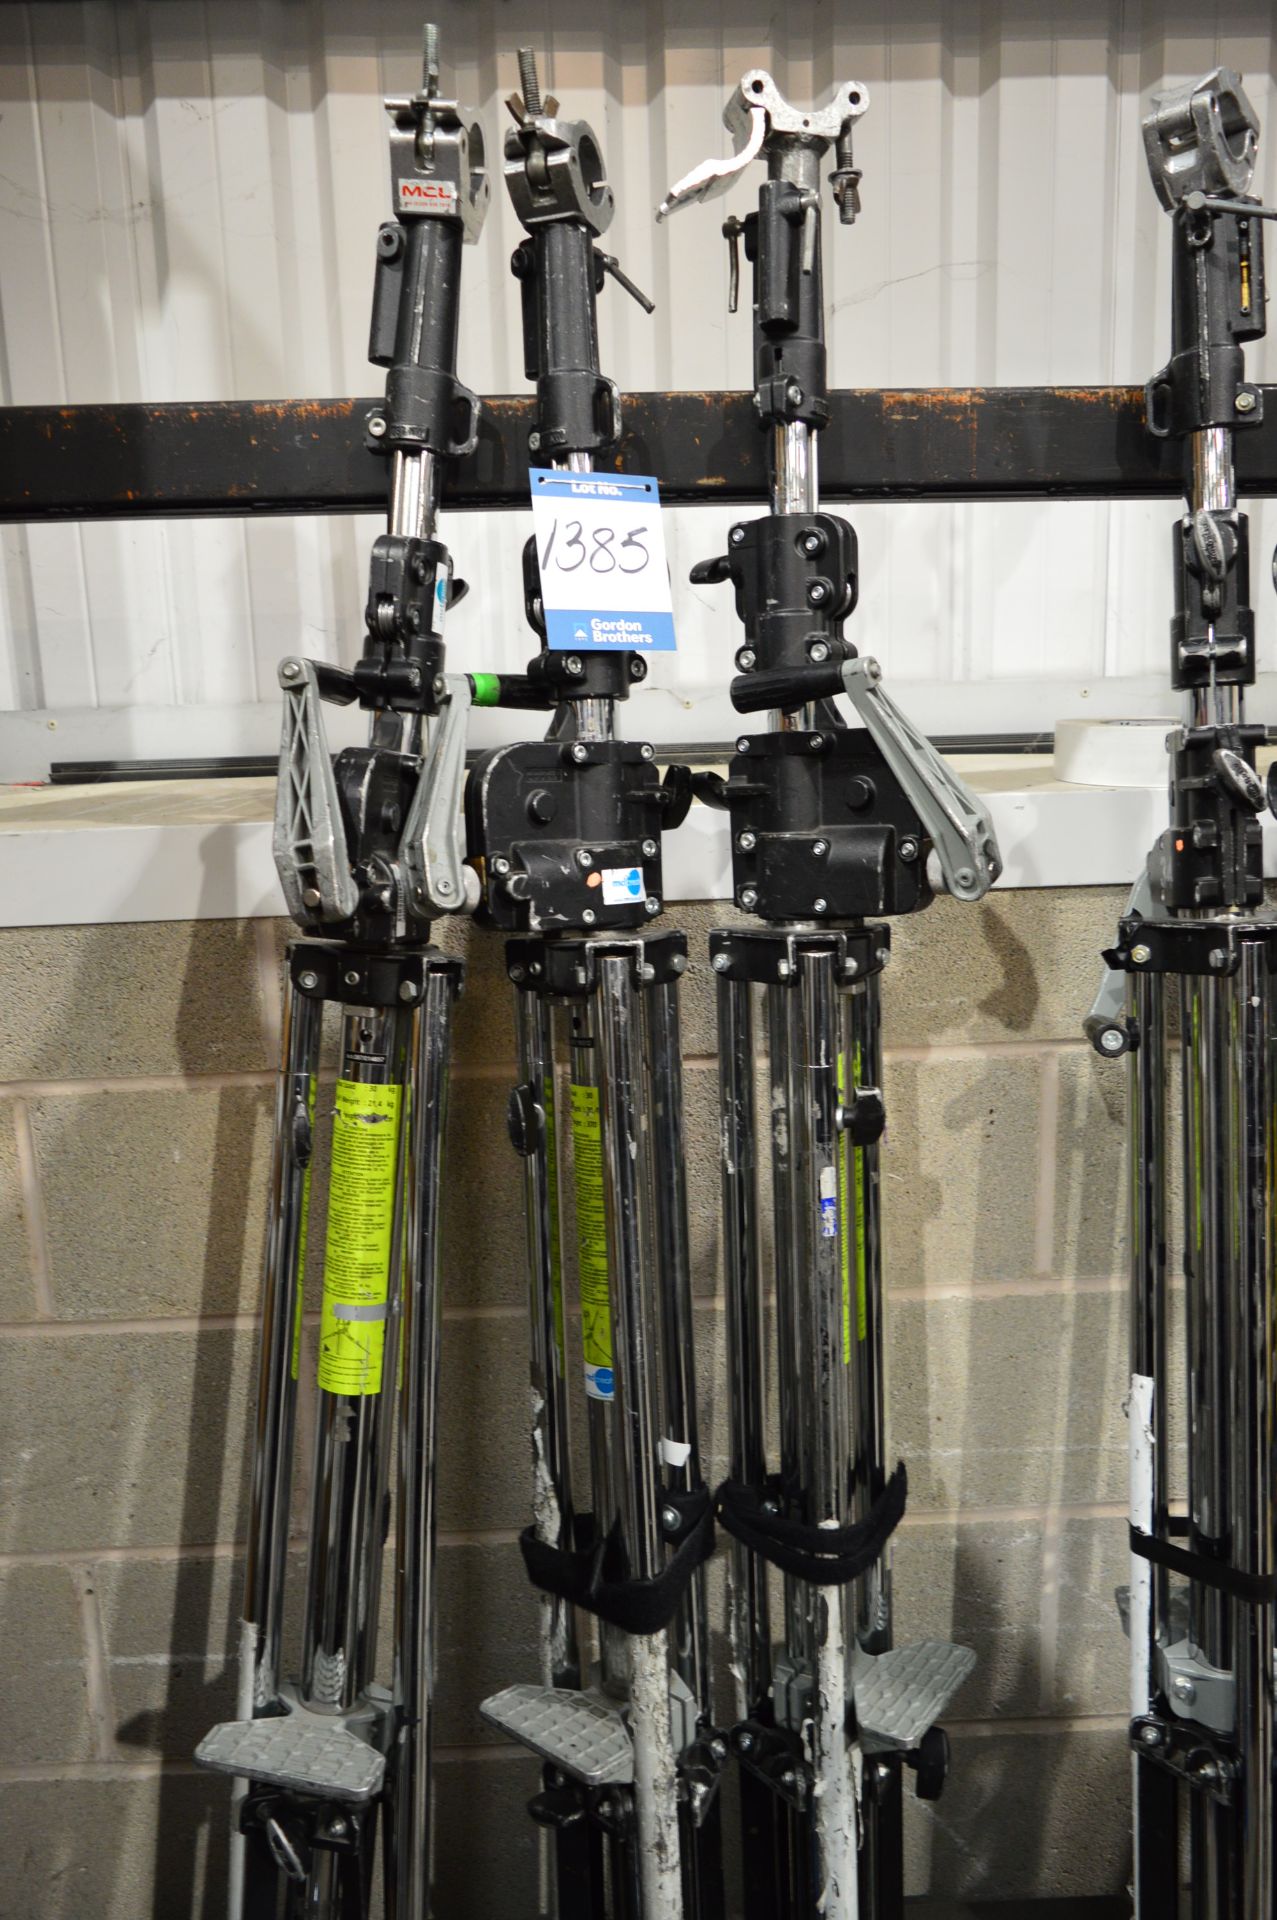 3x No. Manfrotto, wind-up rigging/lighting stands: